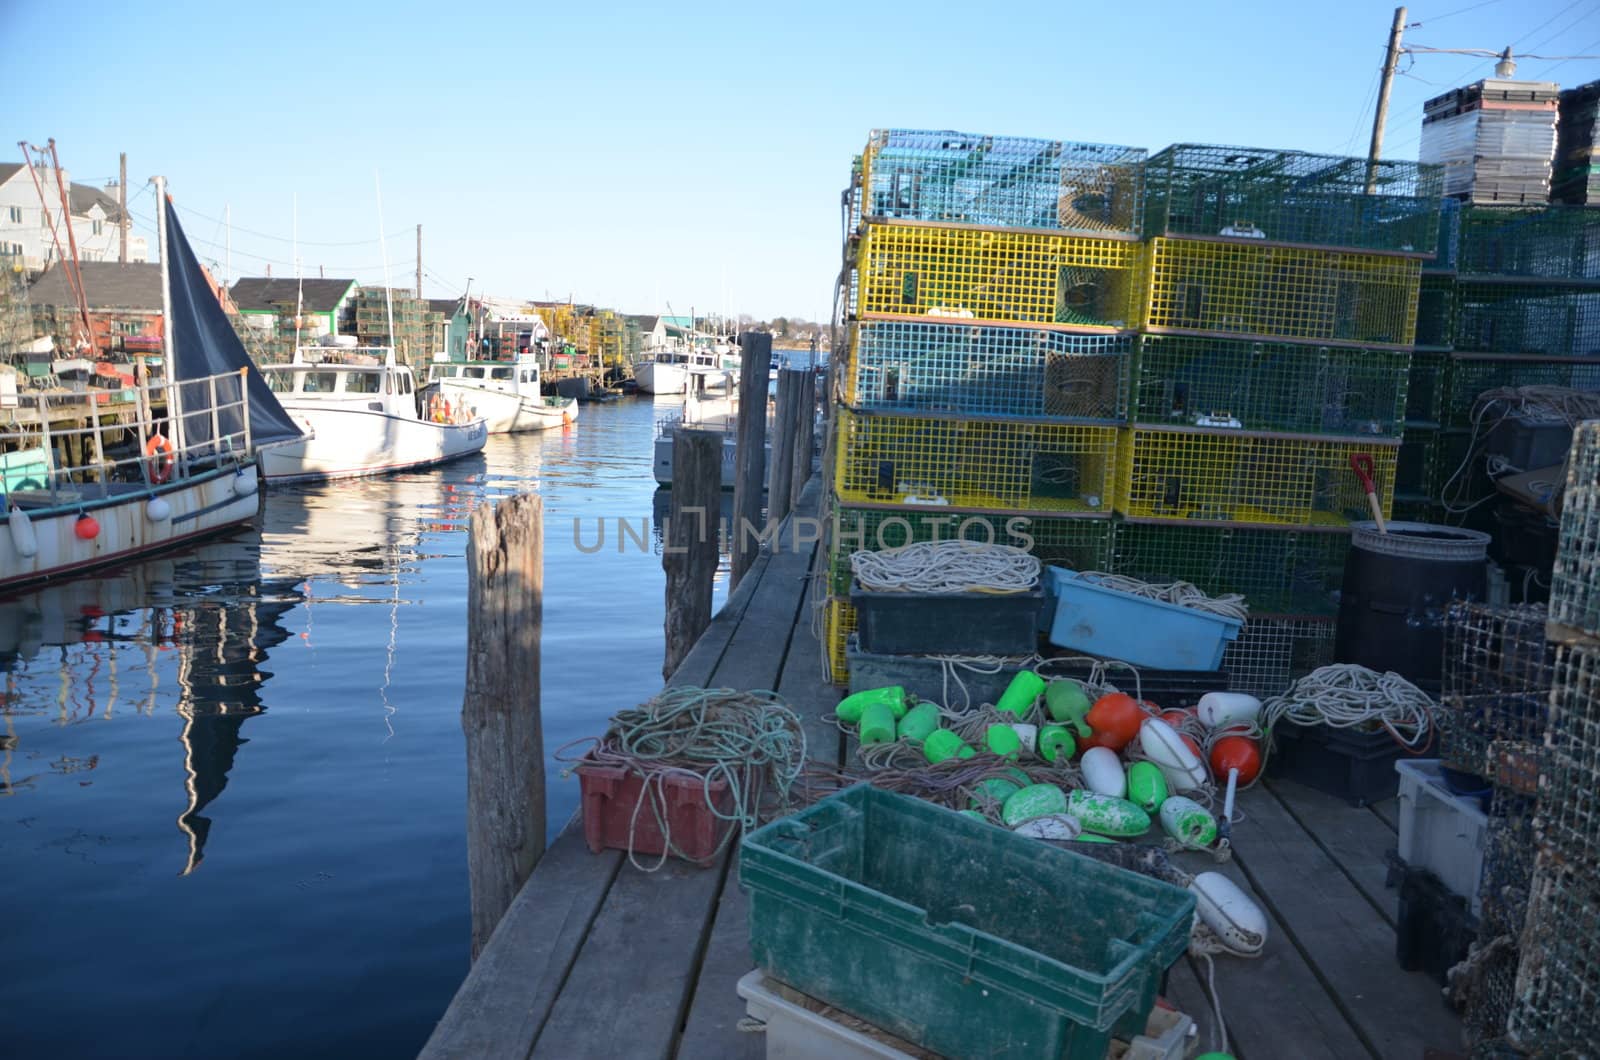 Boats, traps and other gear needed by lobster fisherman